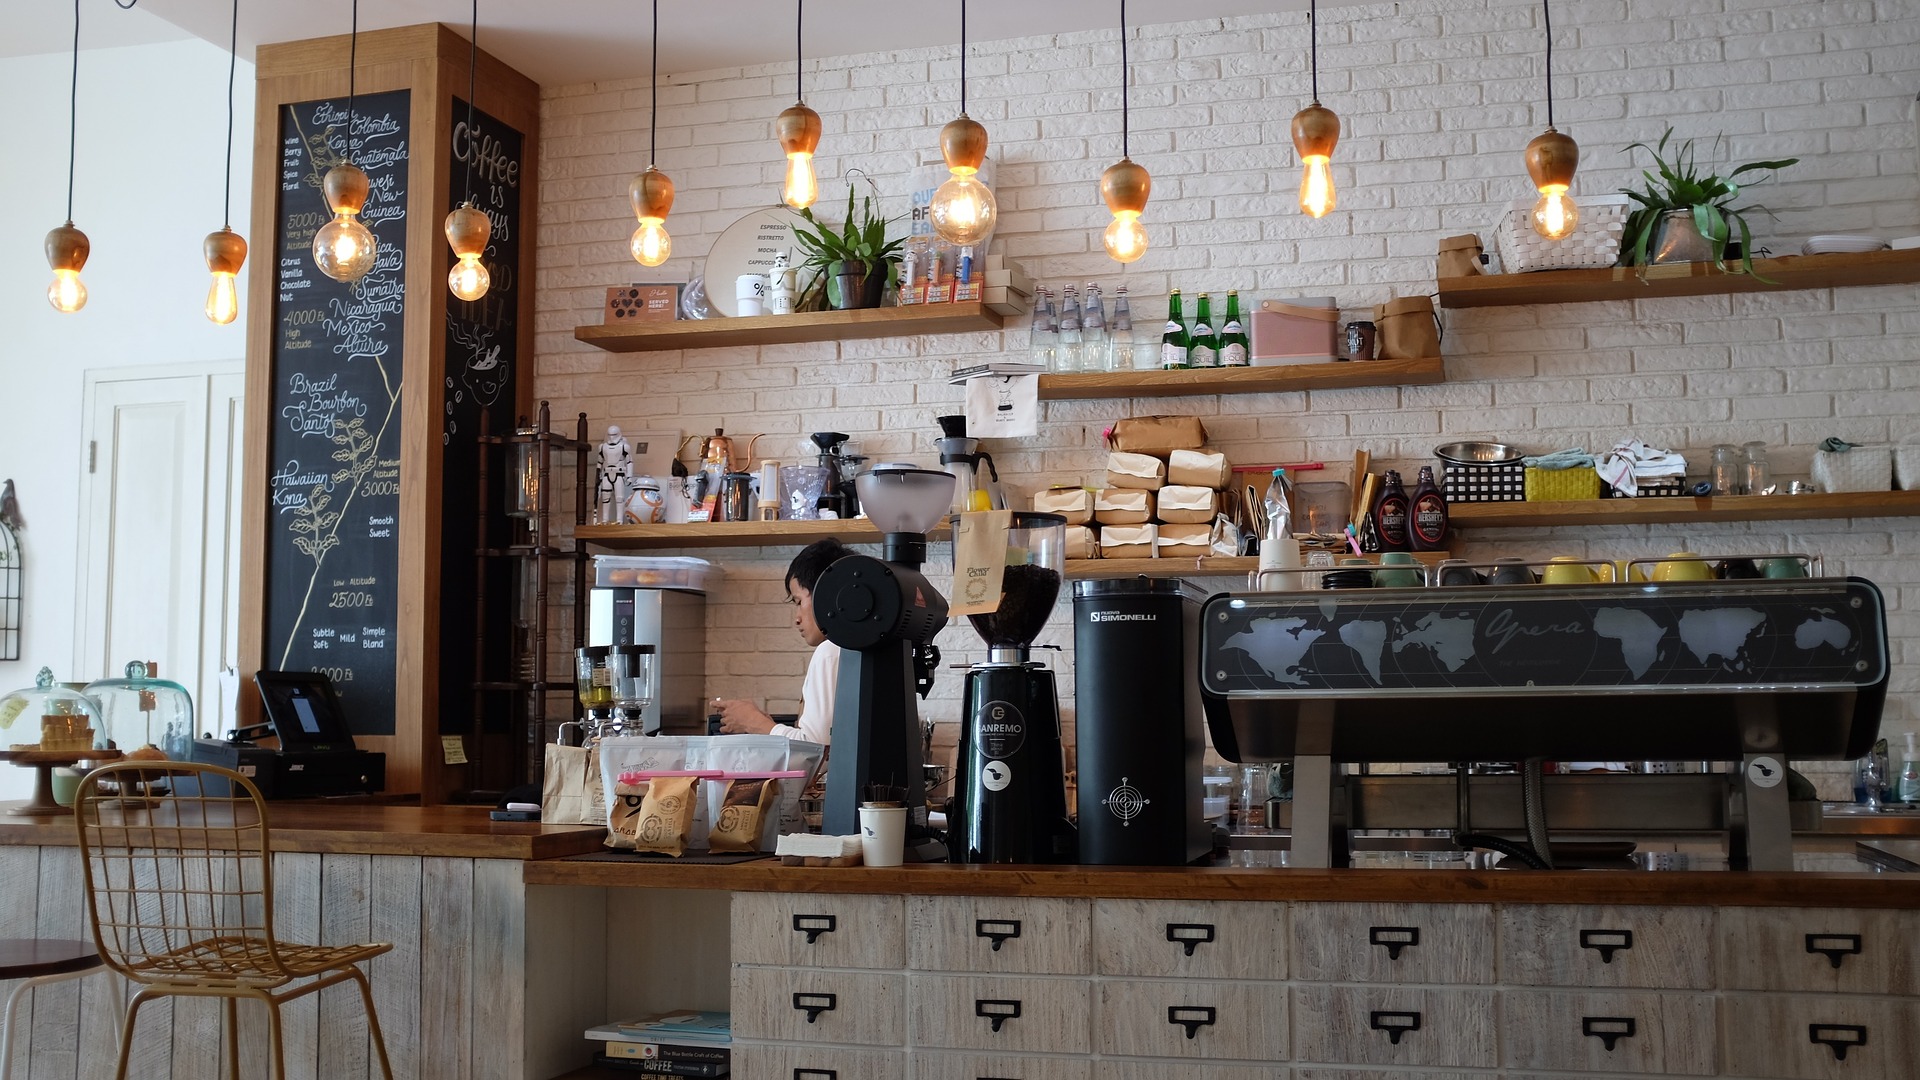 Photo of a cafe counter